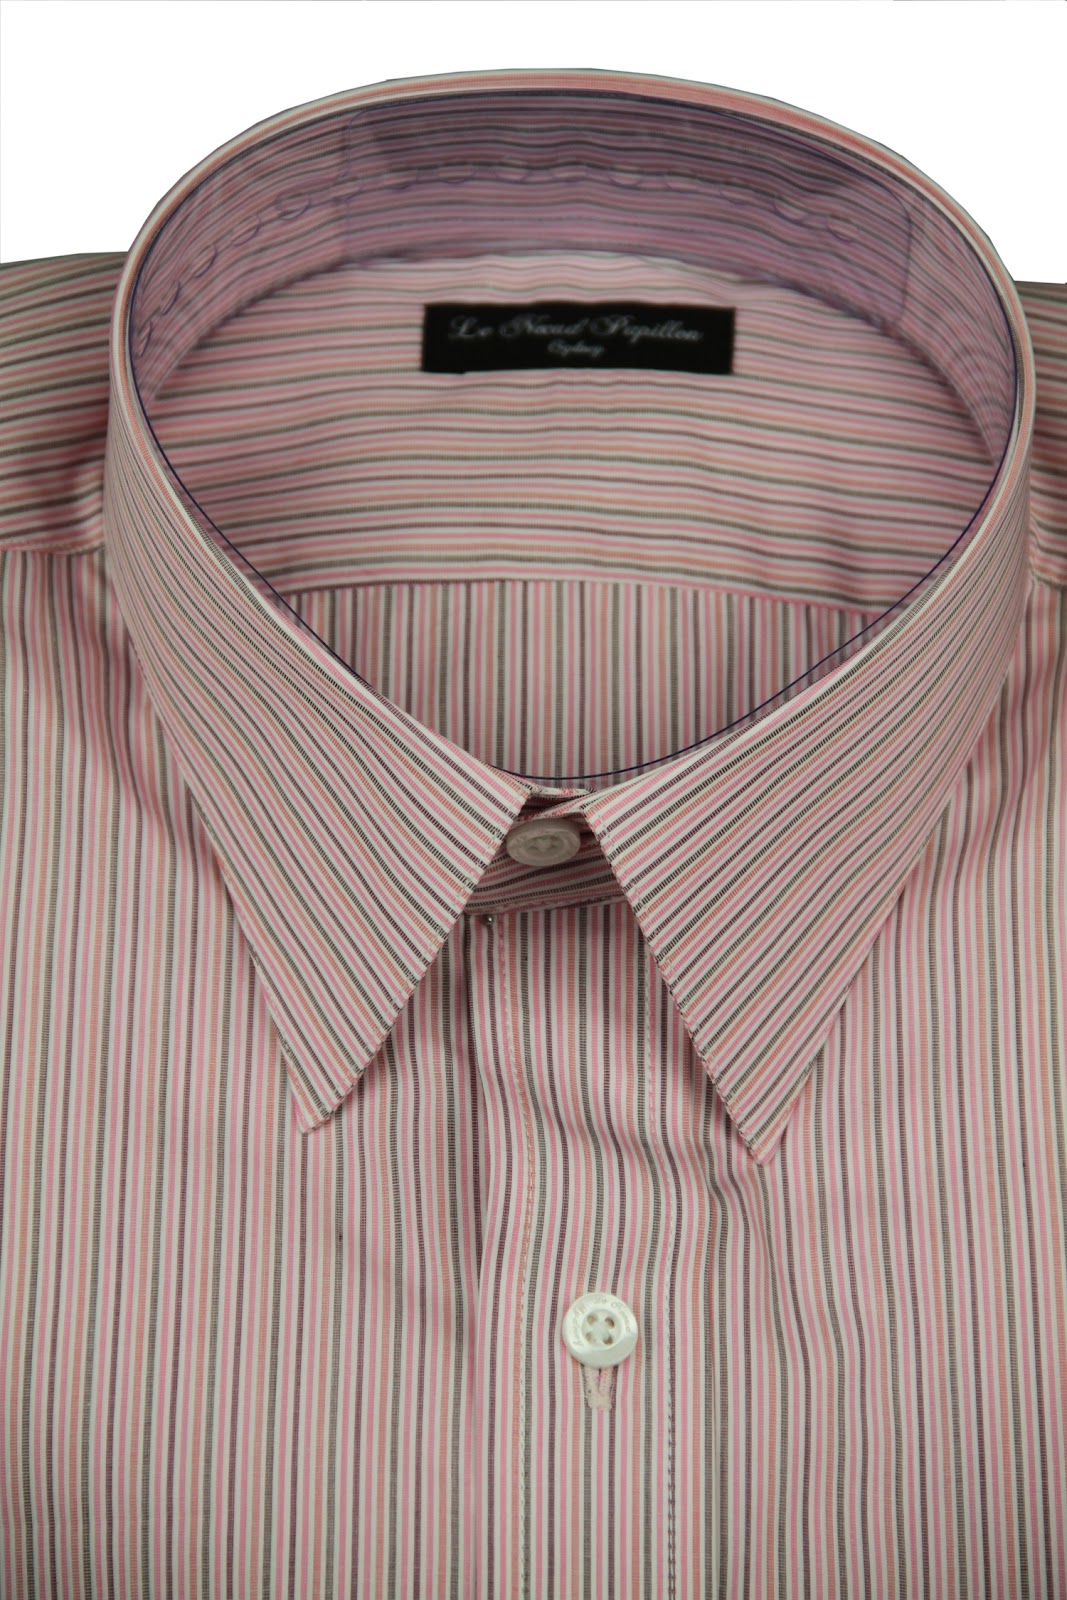 Le Noeud Papillon Of Sydney - For Lovers Of Bow Ties: July 2012